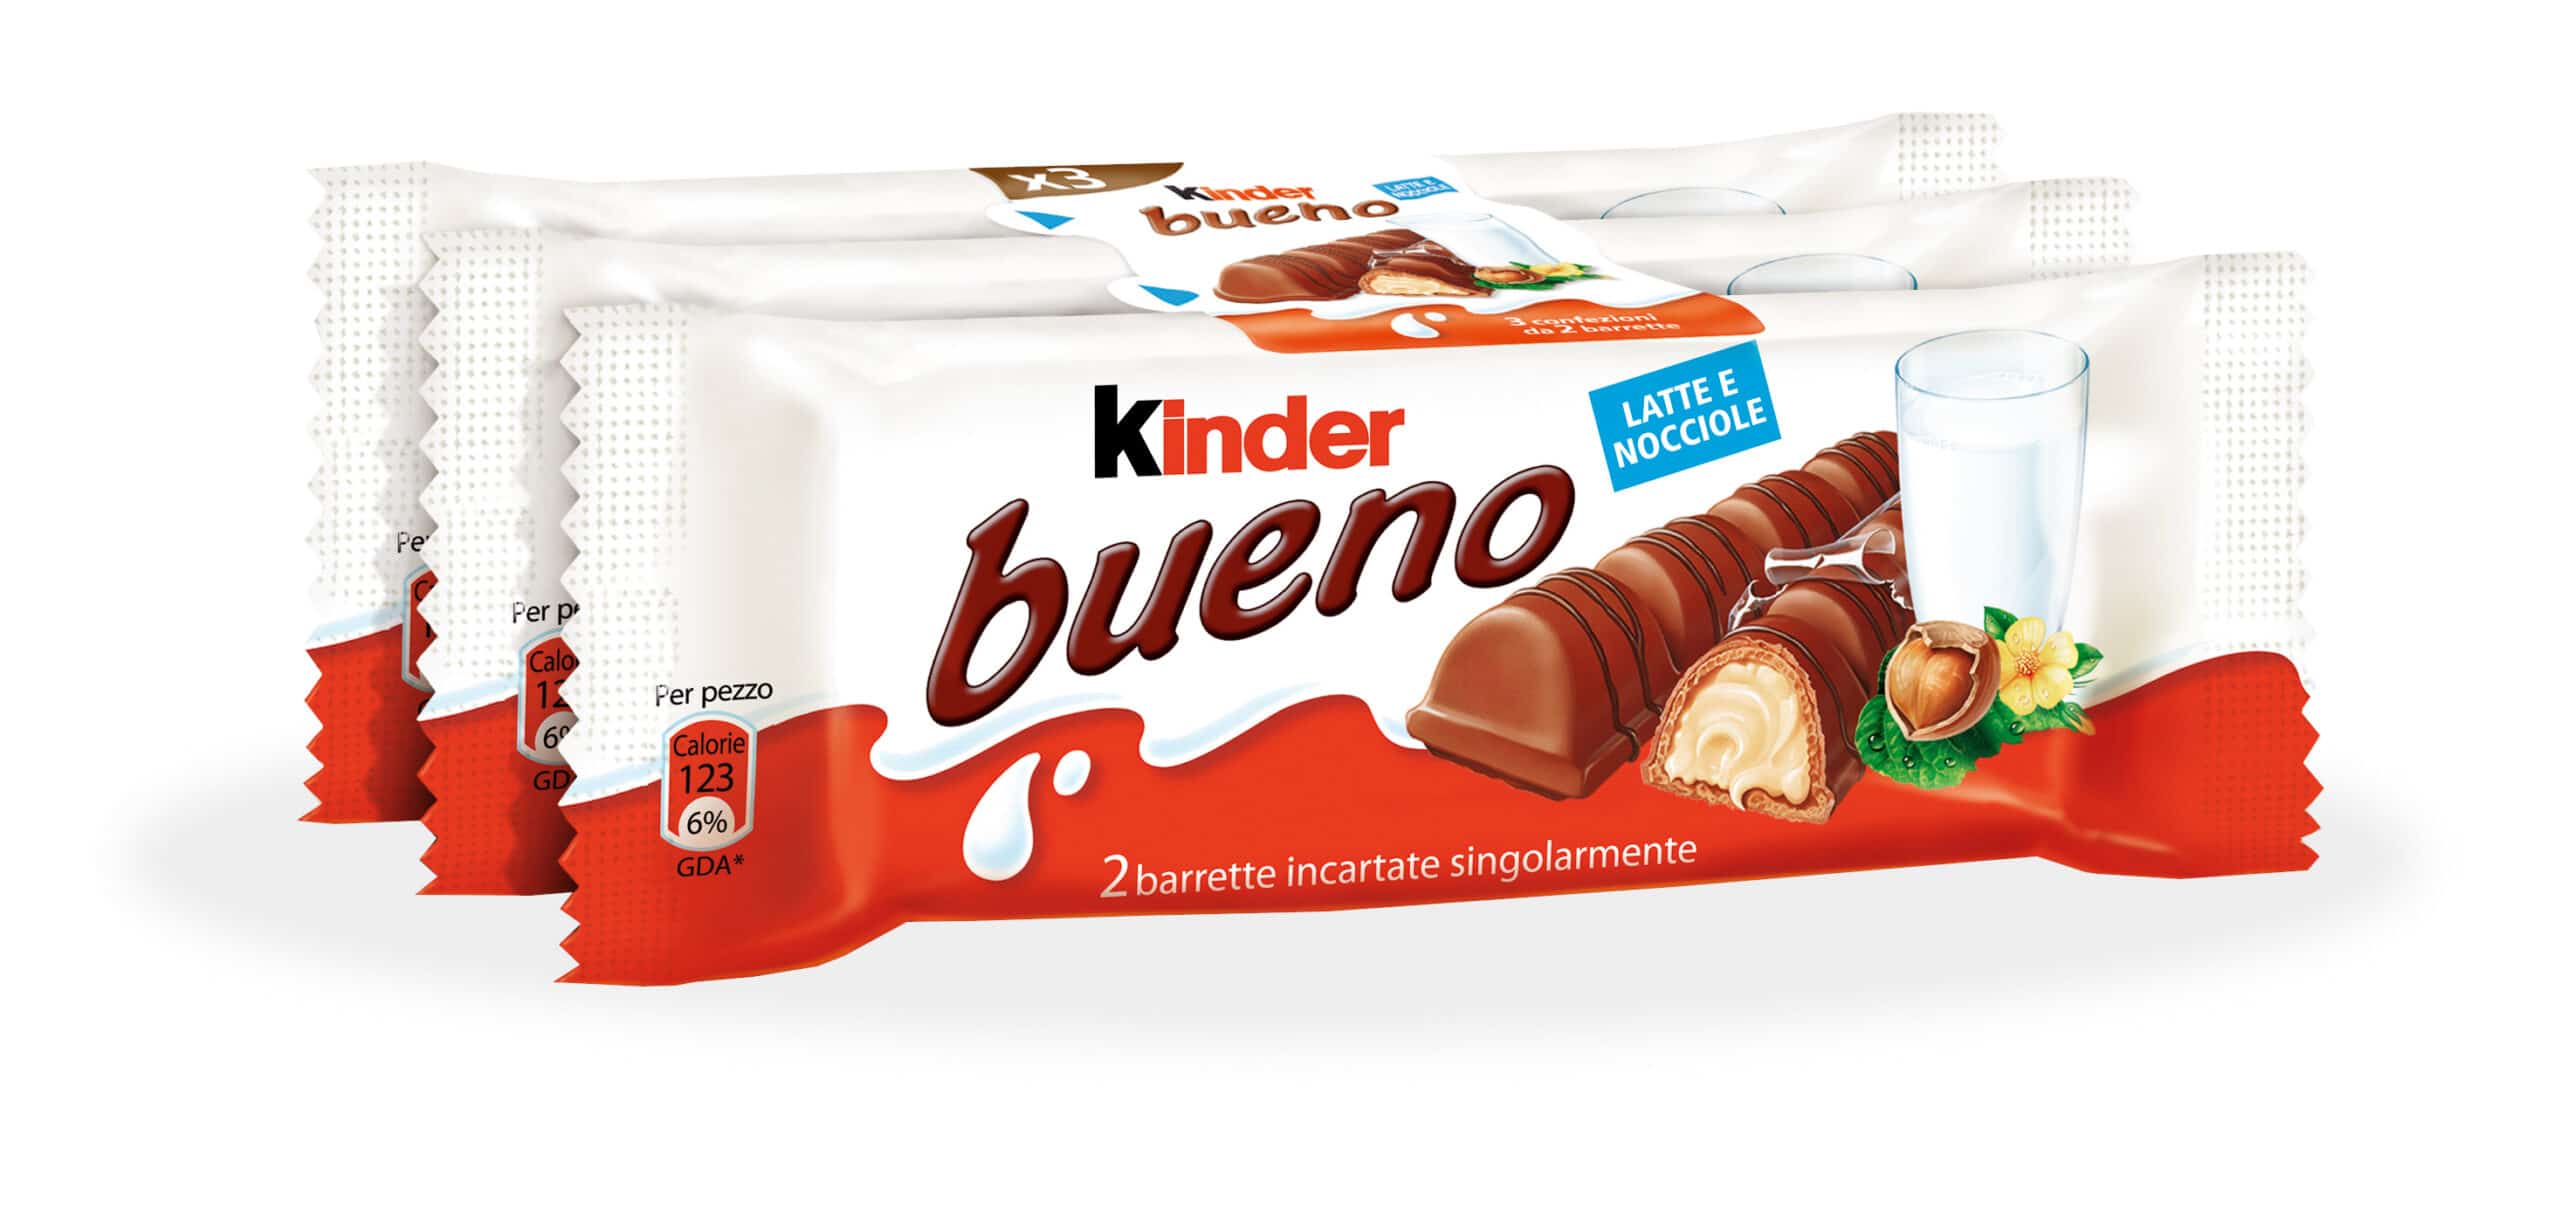 Ferrero: Kinder Bueno chocolate 3pz from Terra “Imported World Wide – Italy”